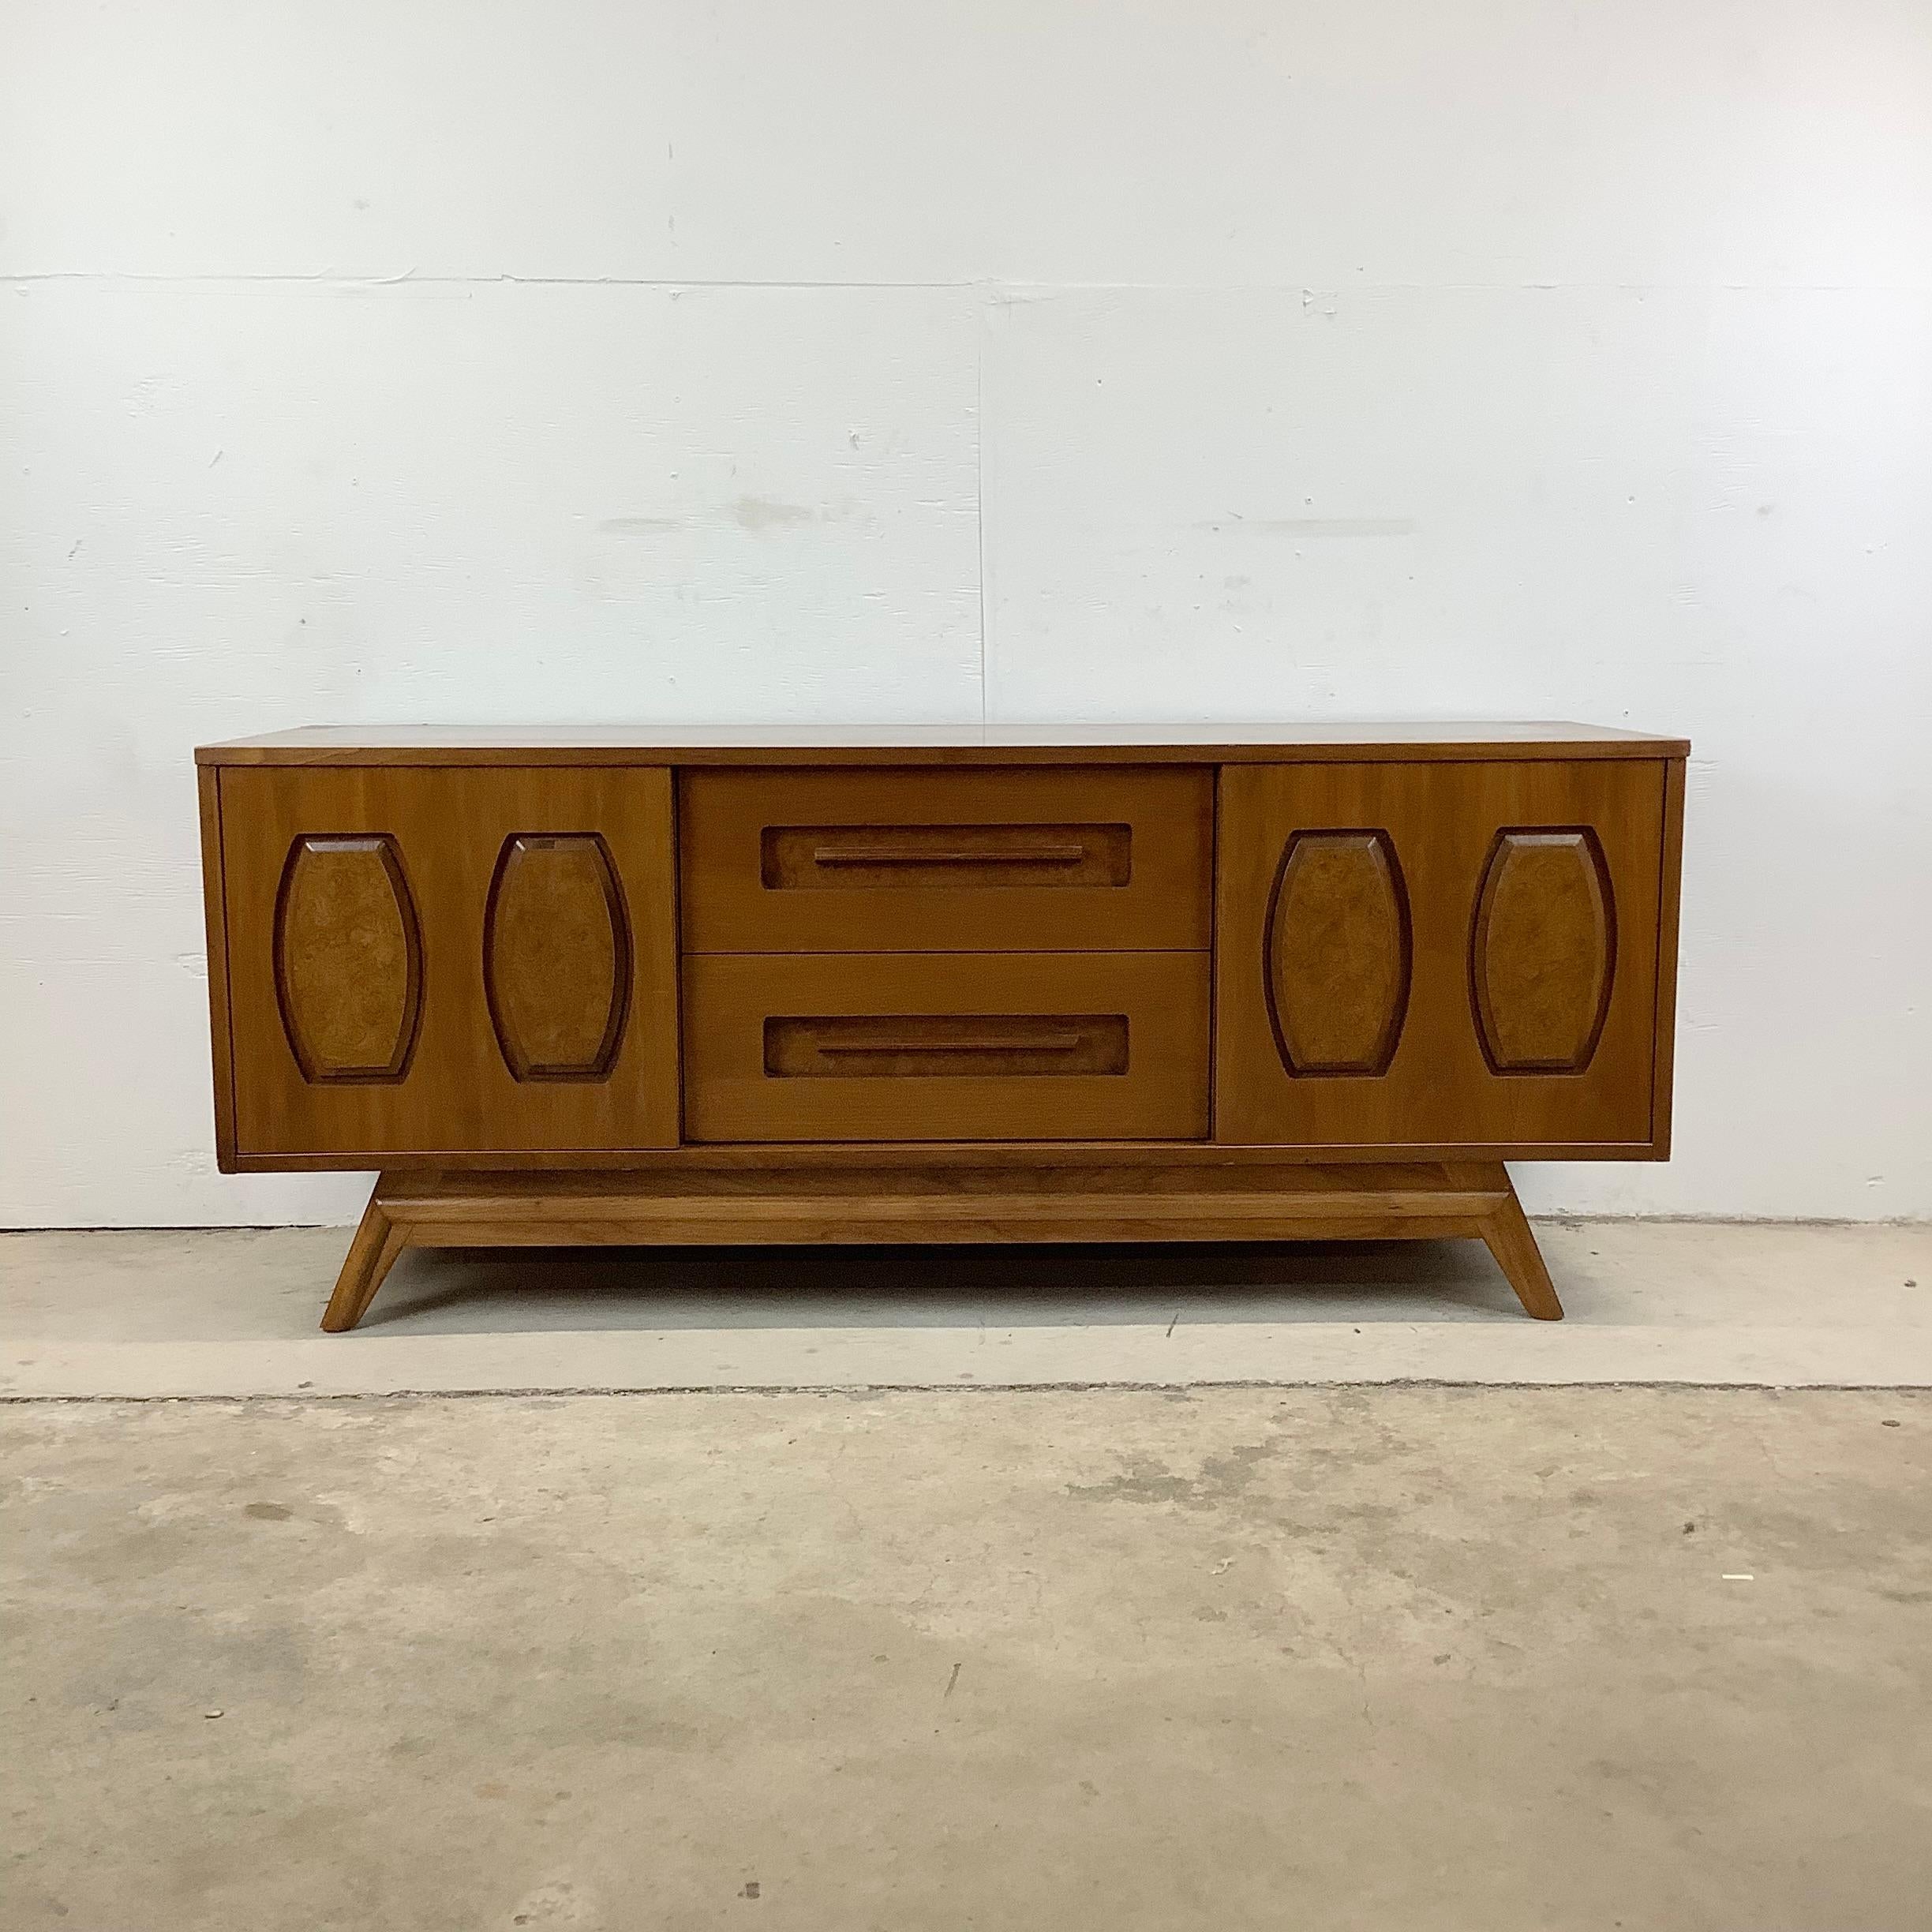 20th Century Mid-Century Modern Sideboard with China Cabinet Display